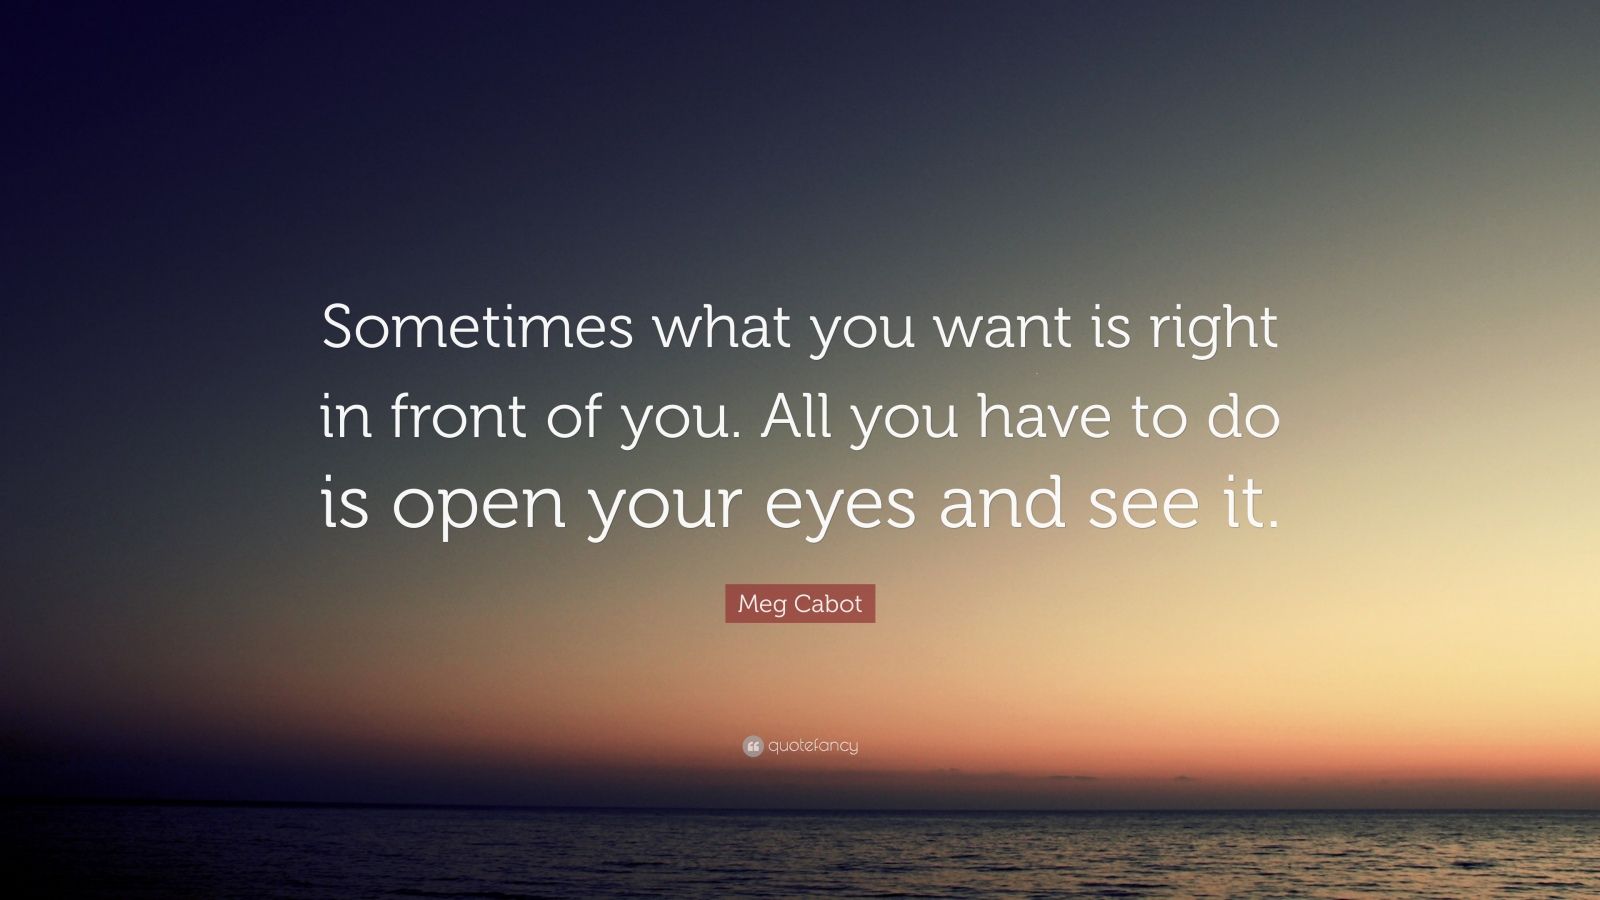 Meg Cabot Quote: “Sometimes what you want is right in front of you. All